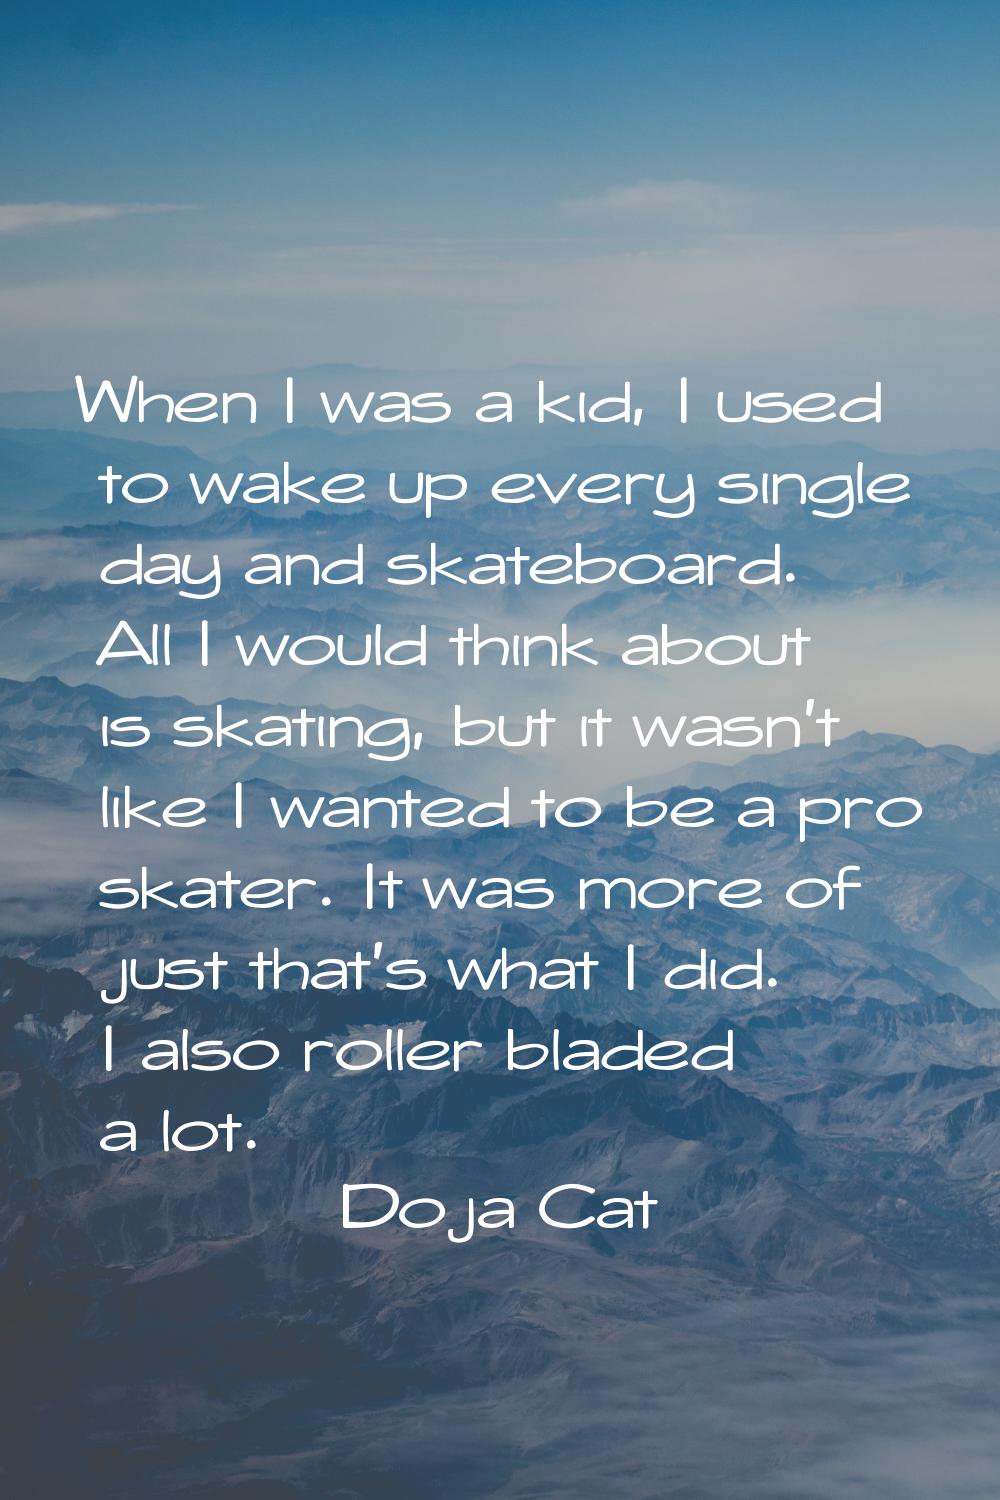 When I was a kid, I used to wake up every single day and skateboard. All I would think about is ska